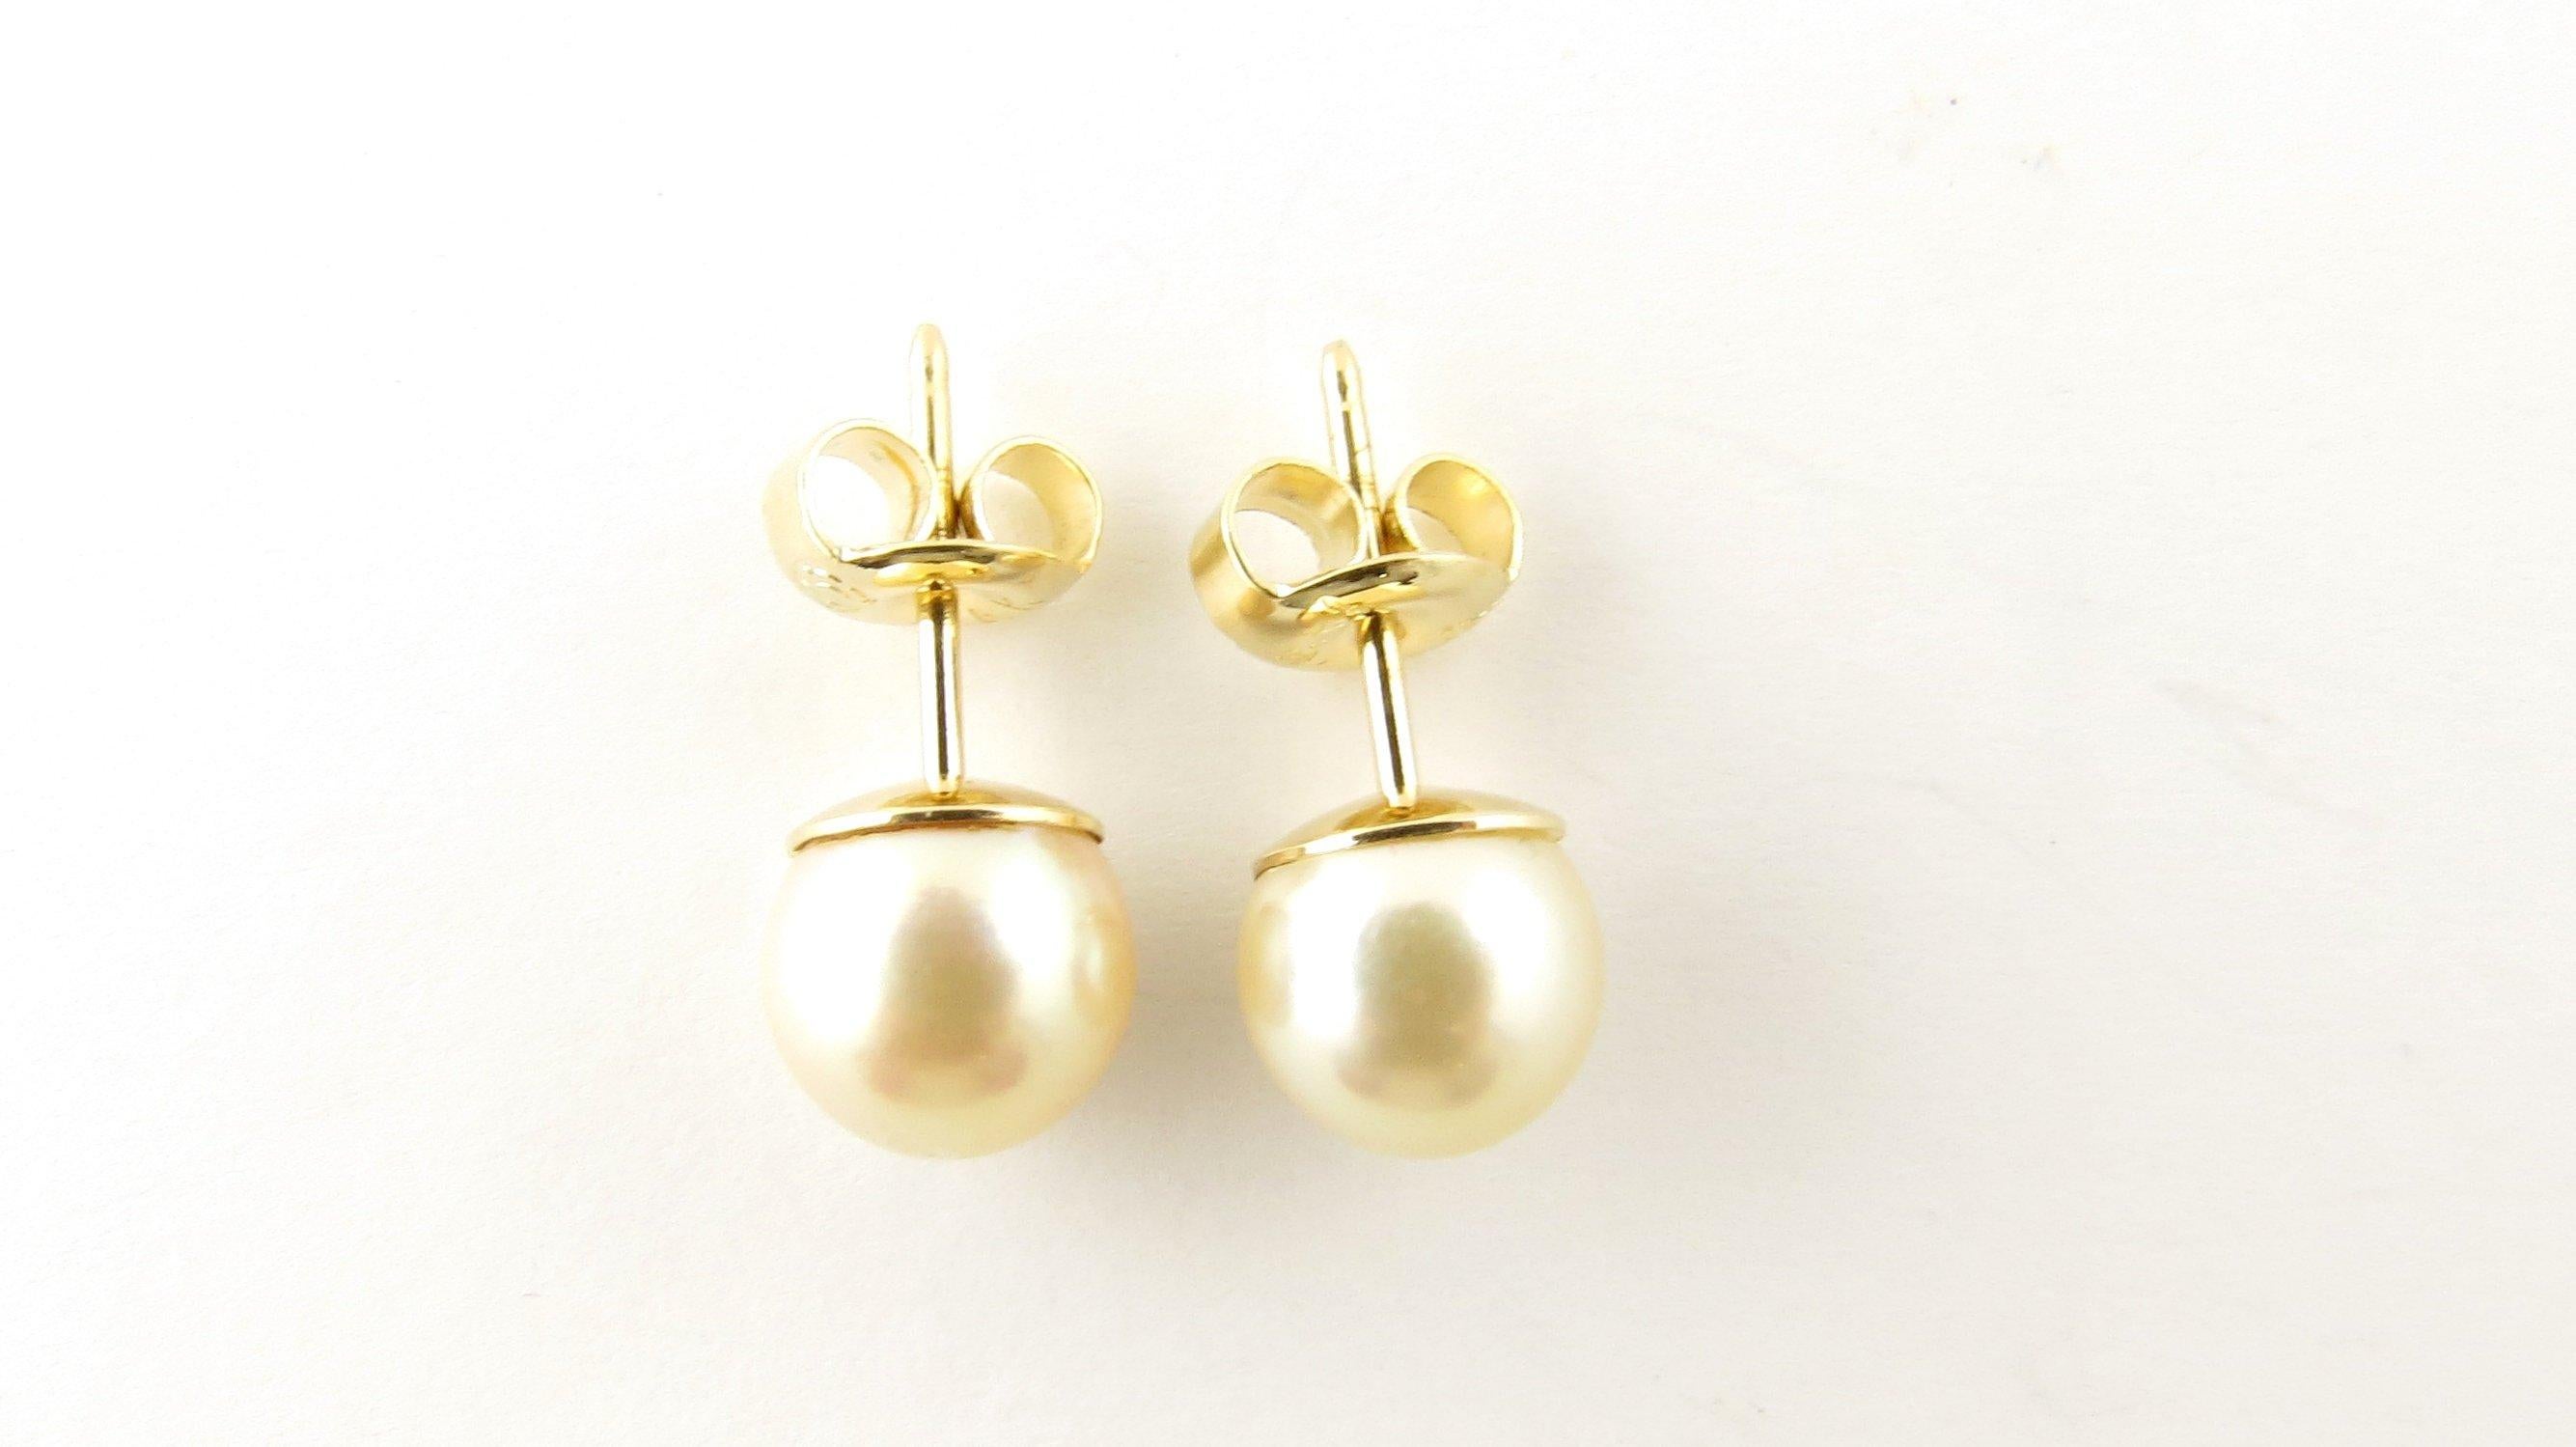 Vintage 14 Karat Yellow Gold Pearl Earrings- These elegant stud earrings each feature one 7 mm cultured pearl set in classic 14K yellow gold. Push back closures. Size: 7 mm Weight: 0.5 dwt. / 0.8 gr. Stamped: 14K Italy Very good condition,